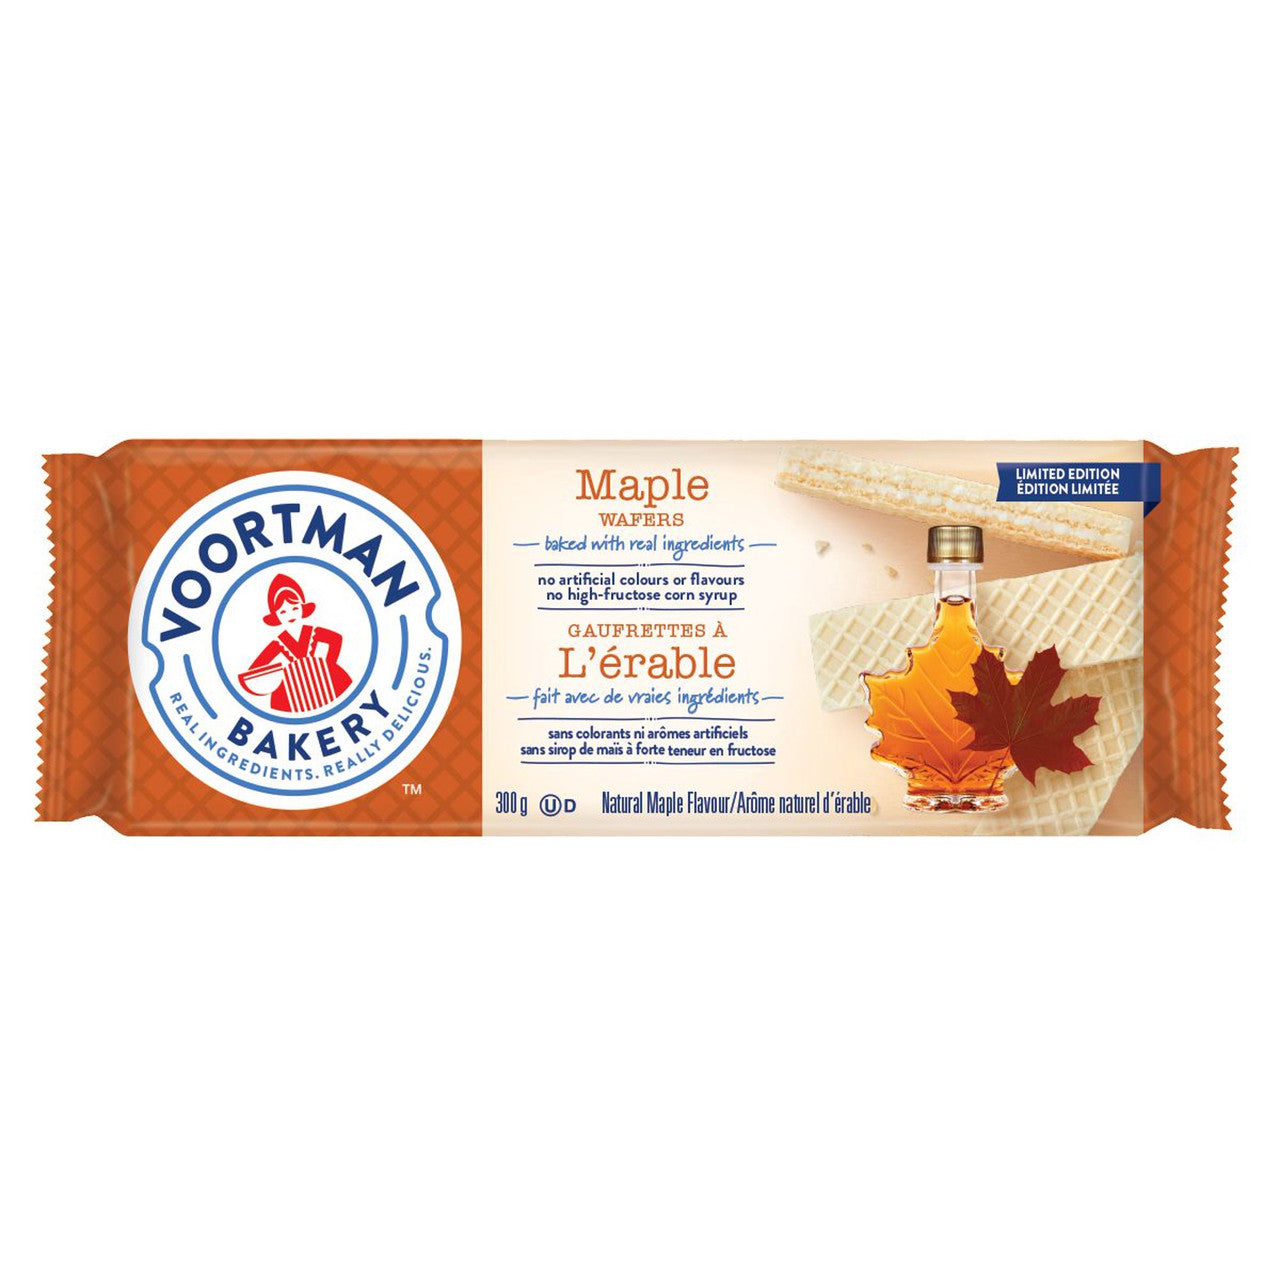 Voortman Maple Wafer Cookies, 300g/10.6 oz., {Imported from Canada}